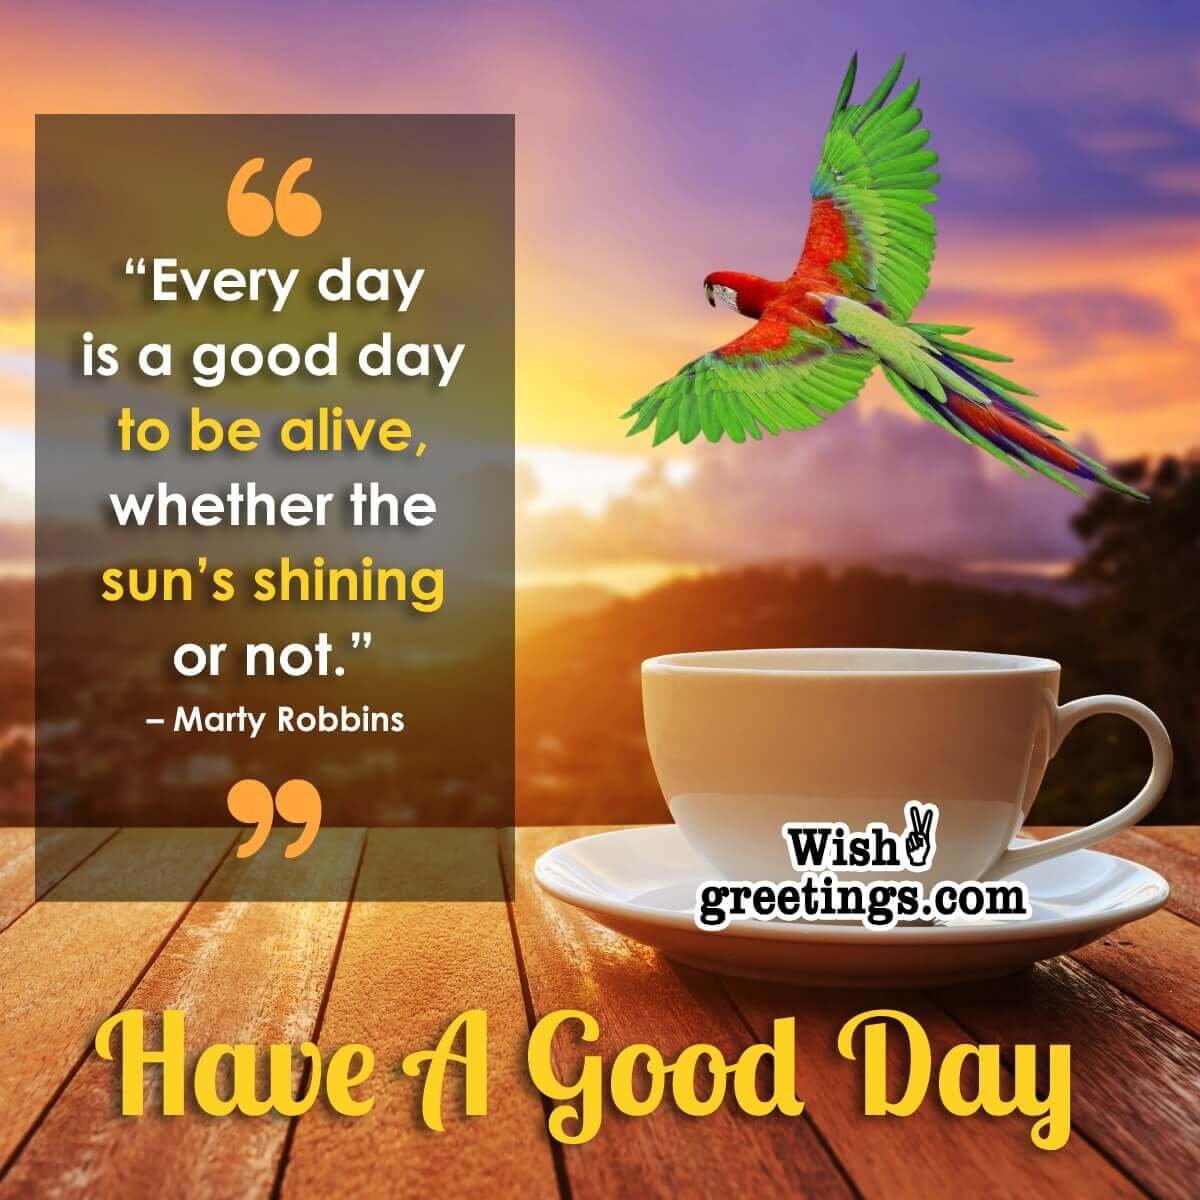 Inspirational Good Day Quotes - Wish Greetings